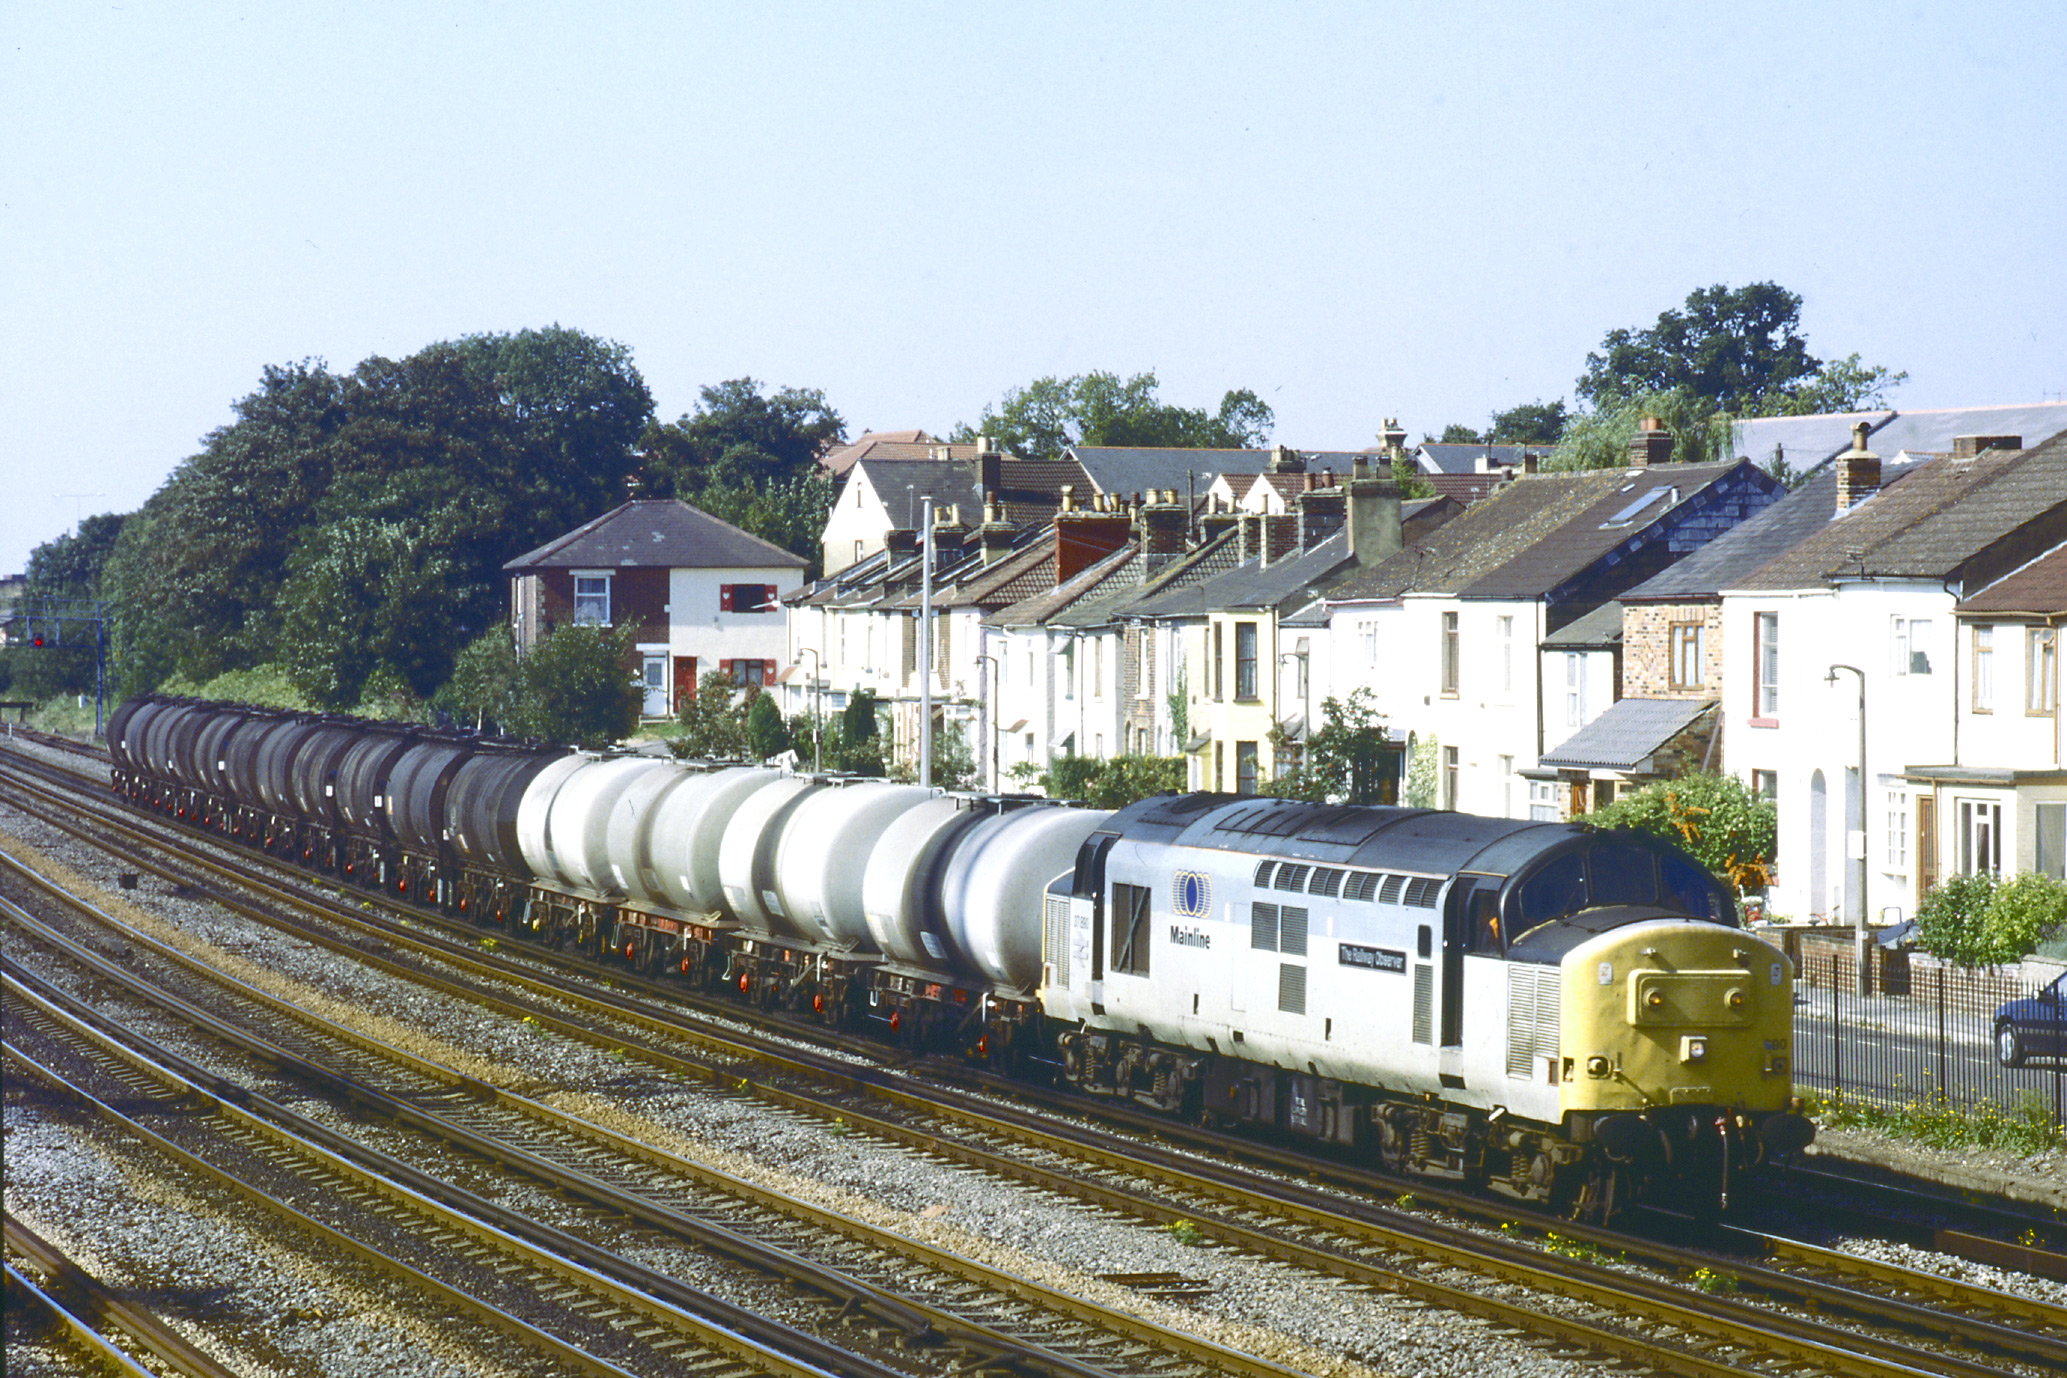 Class 37/7 37890 “The Railway Observer” approaching Southampton Central station with up oil tankers from Fawley Refinery on 17th September 1996. Michael Mensing